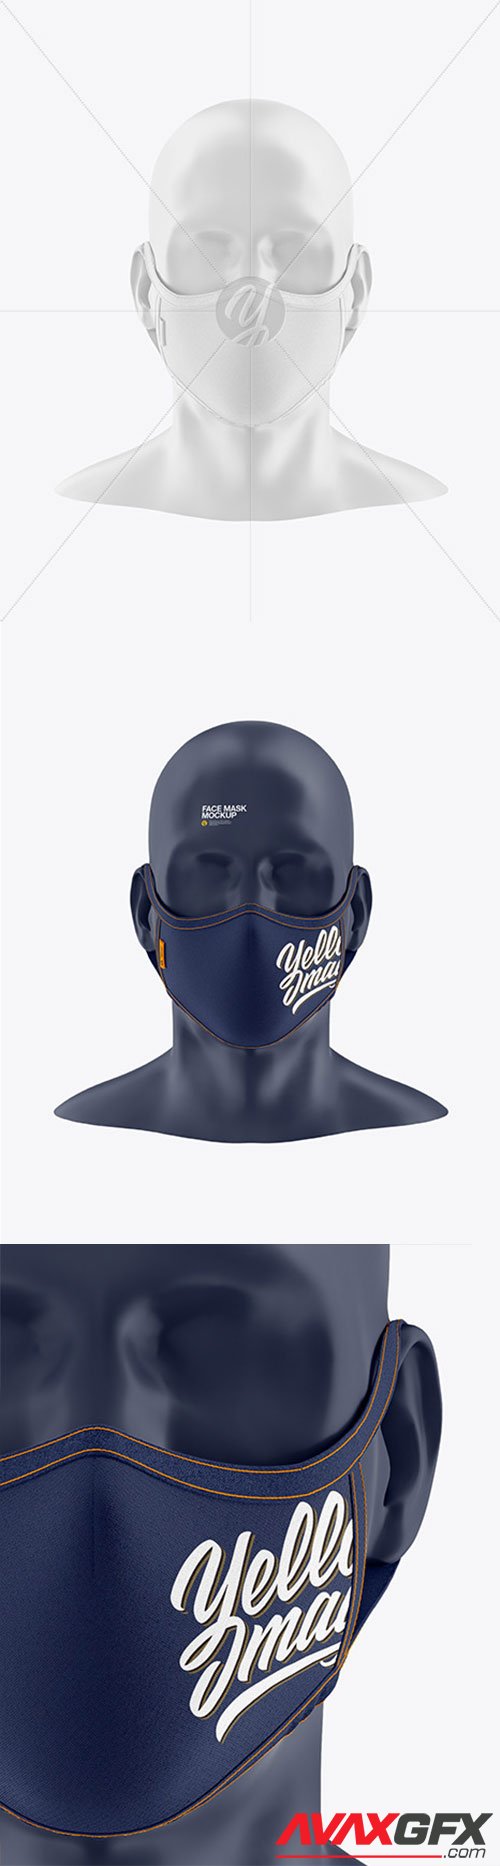 Face Mask Mockup - Front View 62160